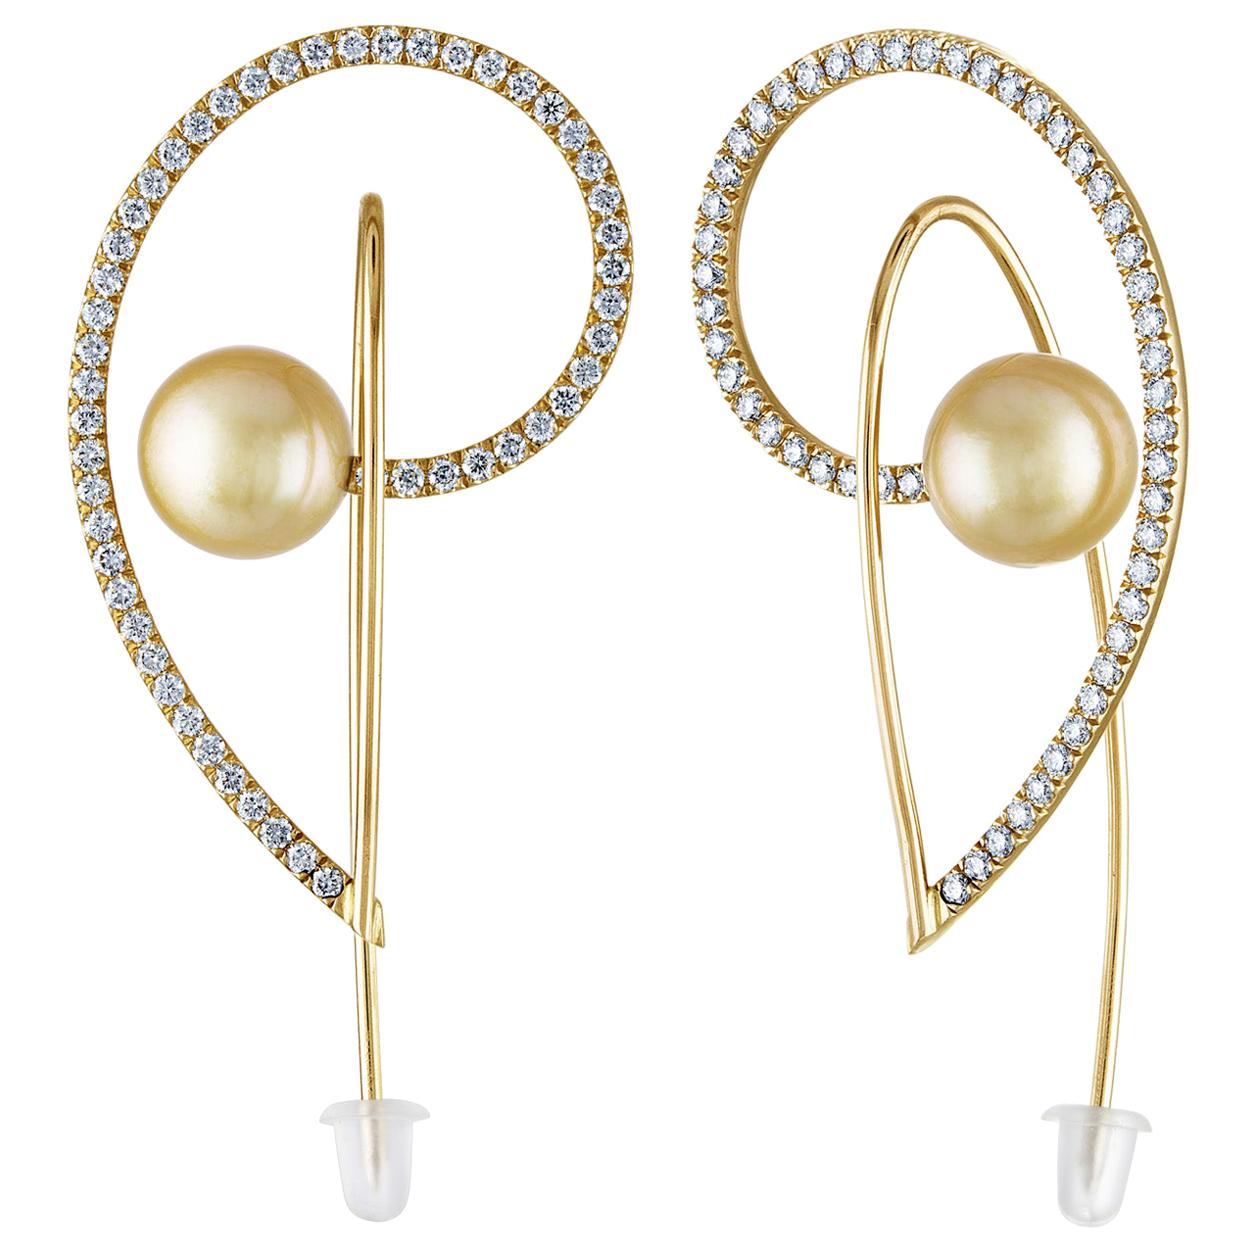 2.00 Carat Diamond Light Golden Yellow South Sea Pearls and Gold Earrings